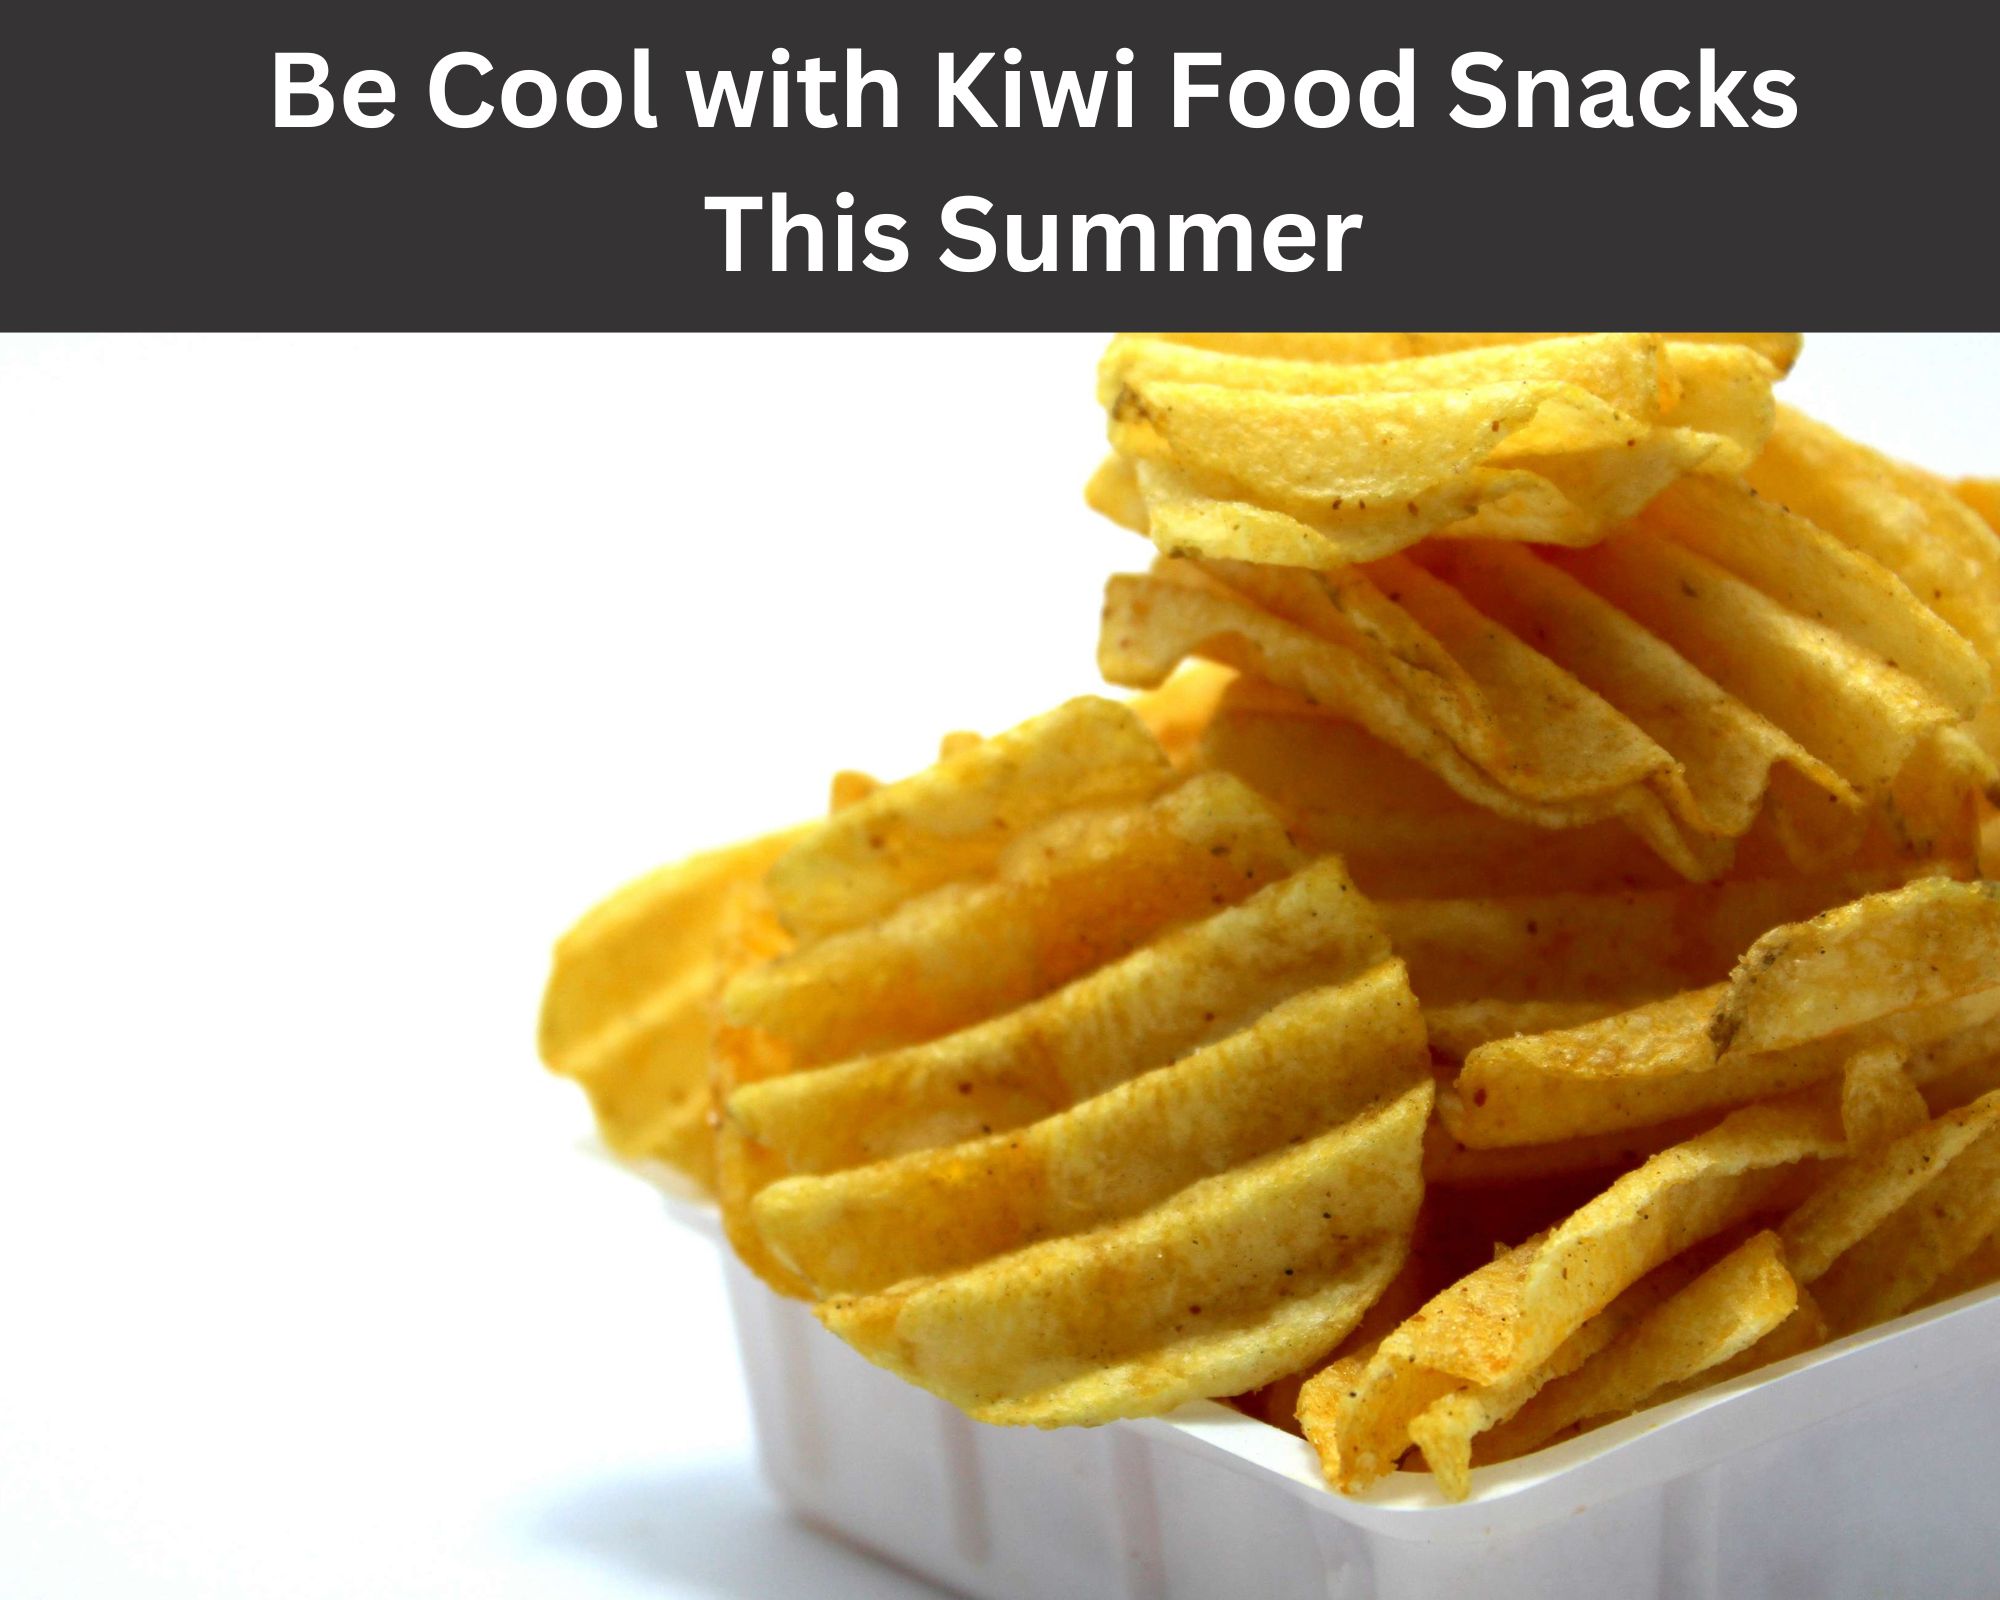 Be Cool with Kiwi Food Snacks This Summer